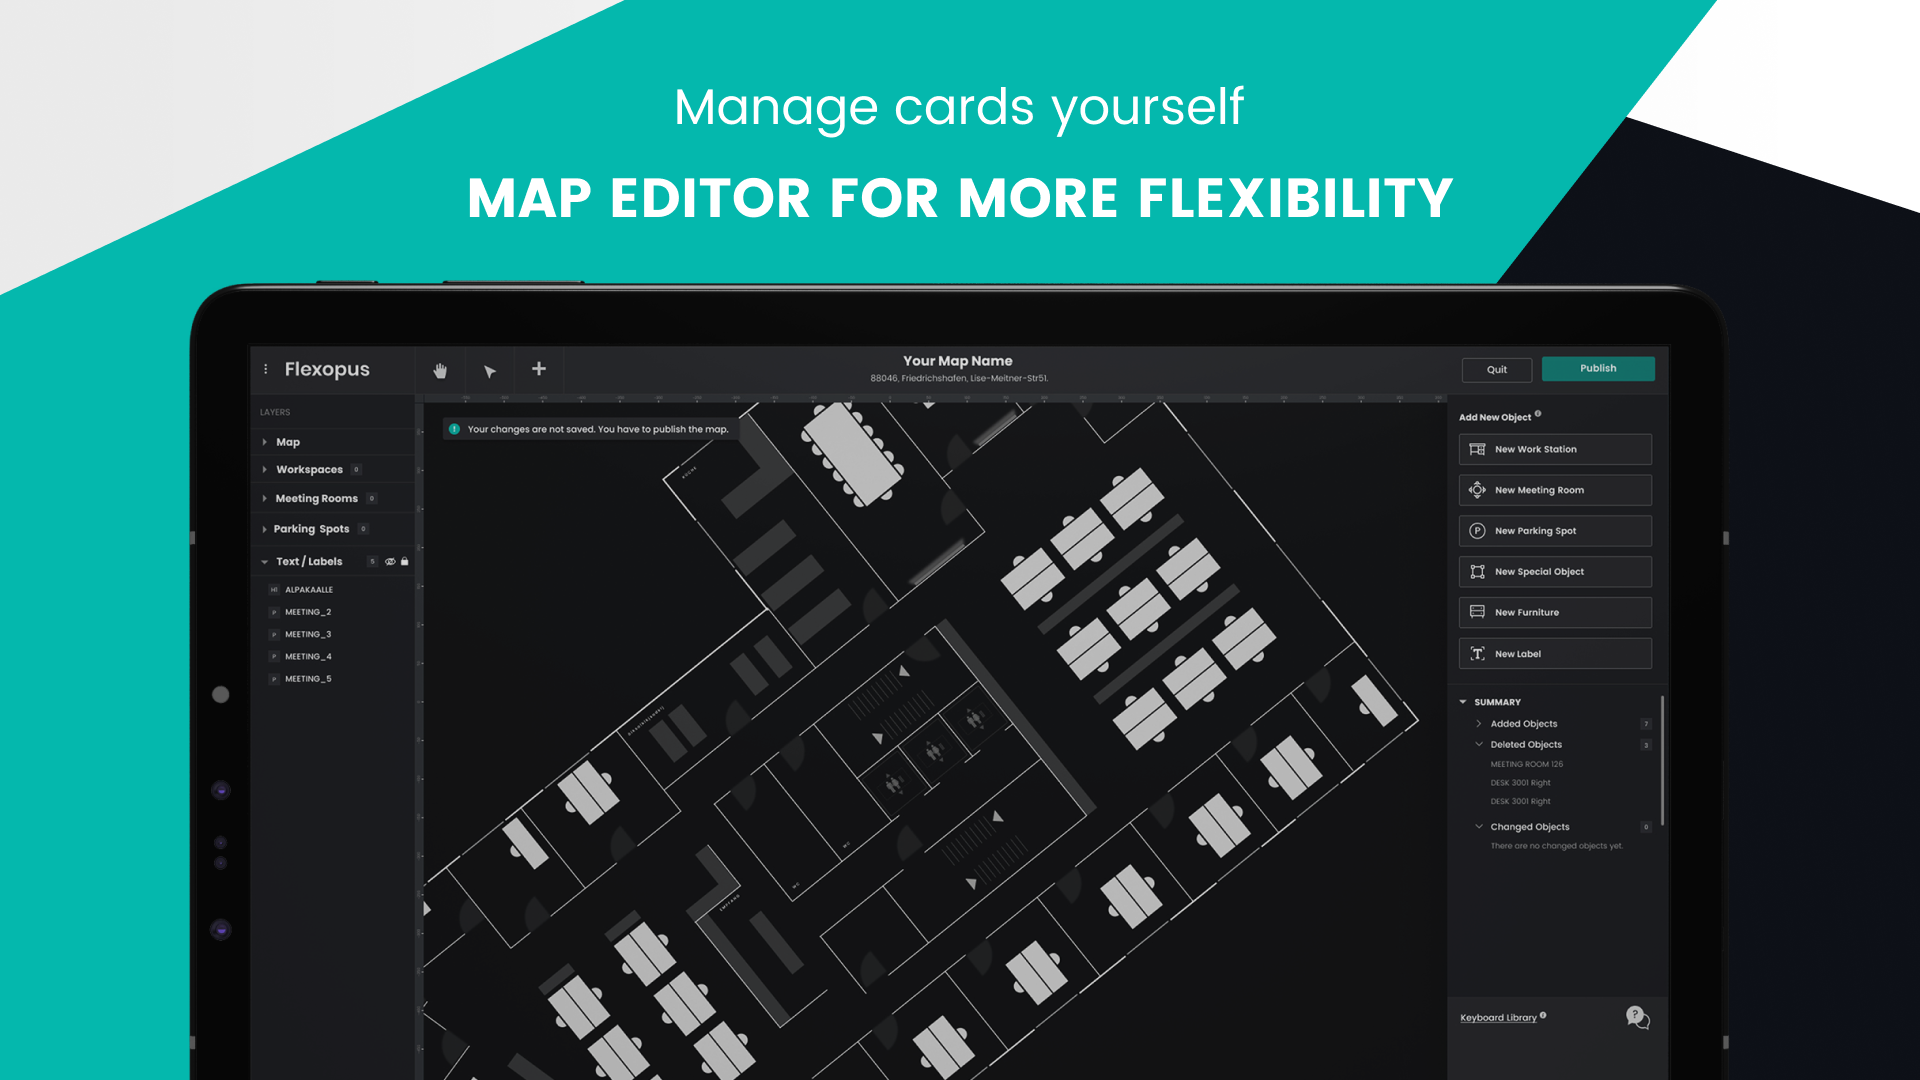 Flexopus Map Editor lets you stay flexible. Add, delete, or edit objects in your floor plan without having to contact us!